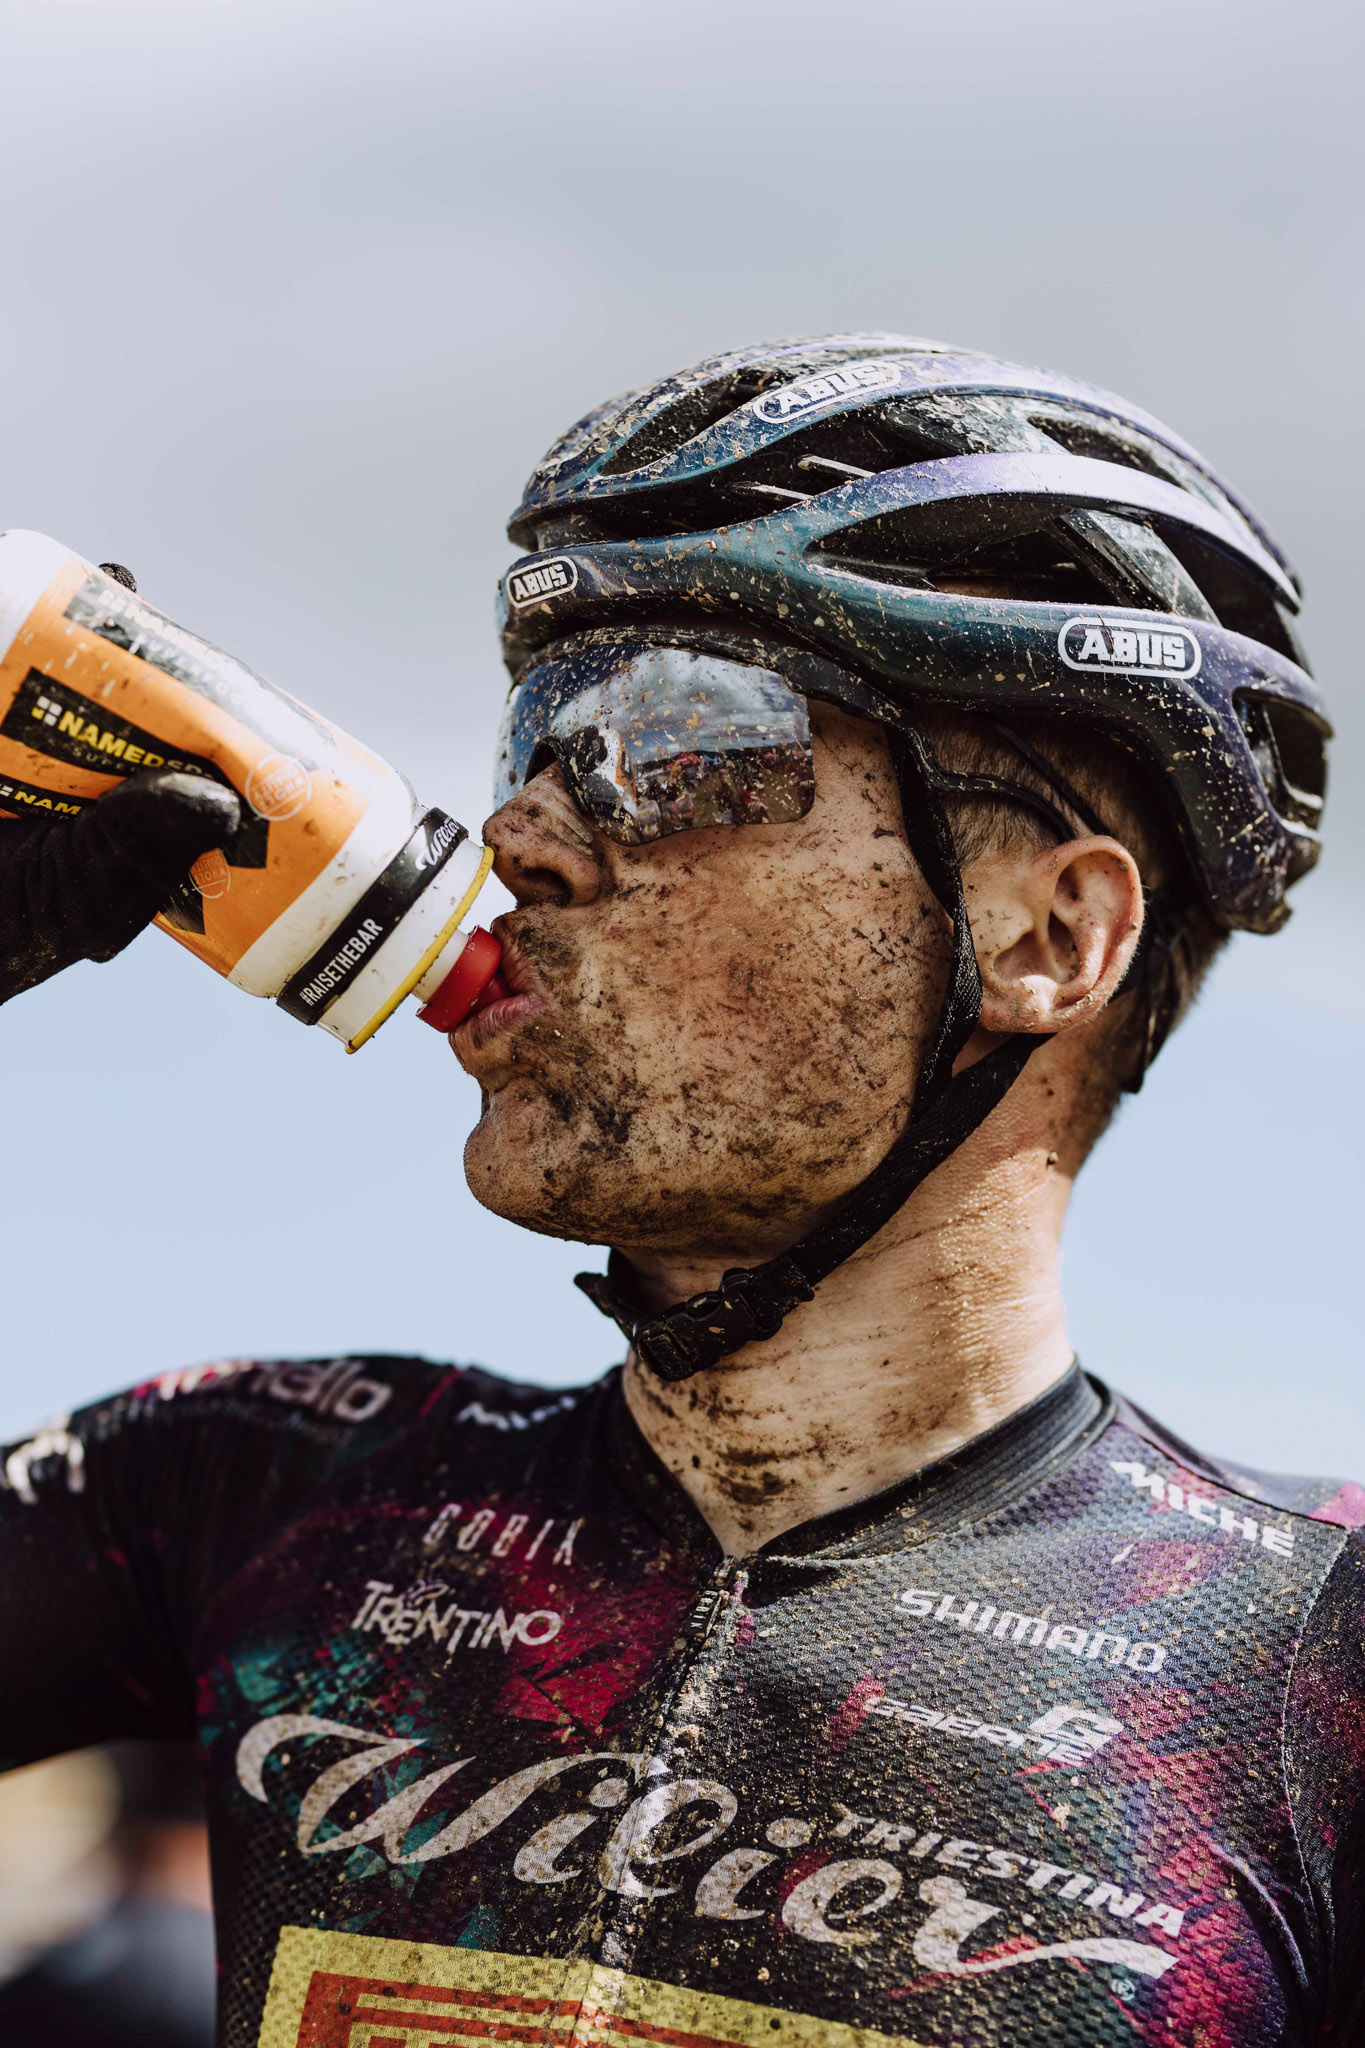 A cyclist drinking from a water bottle, his face covered in mud splatters